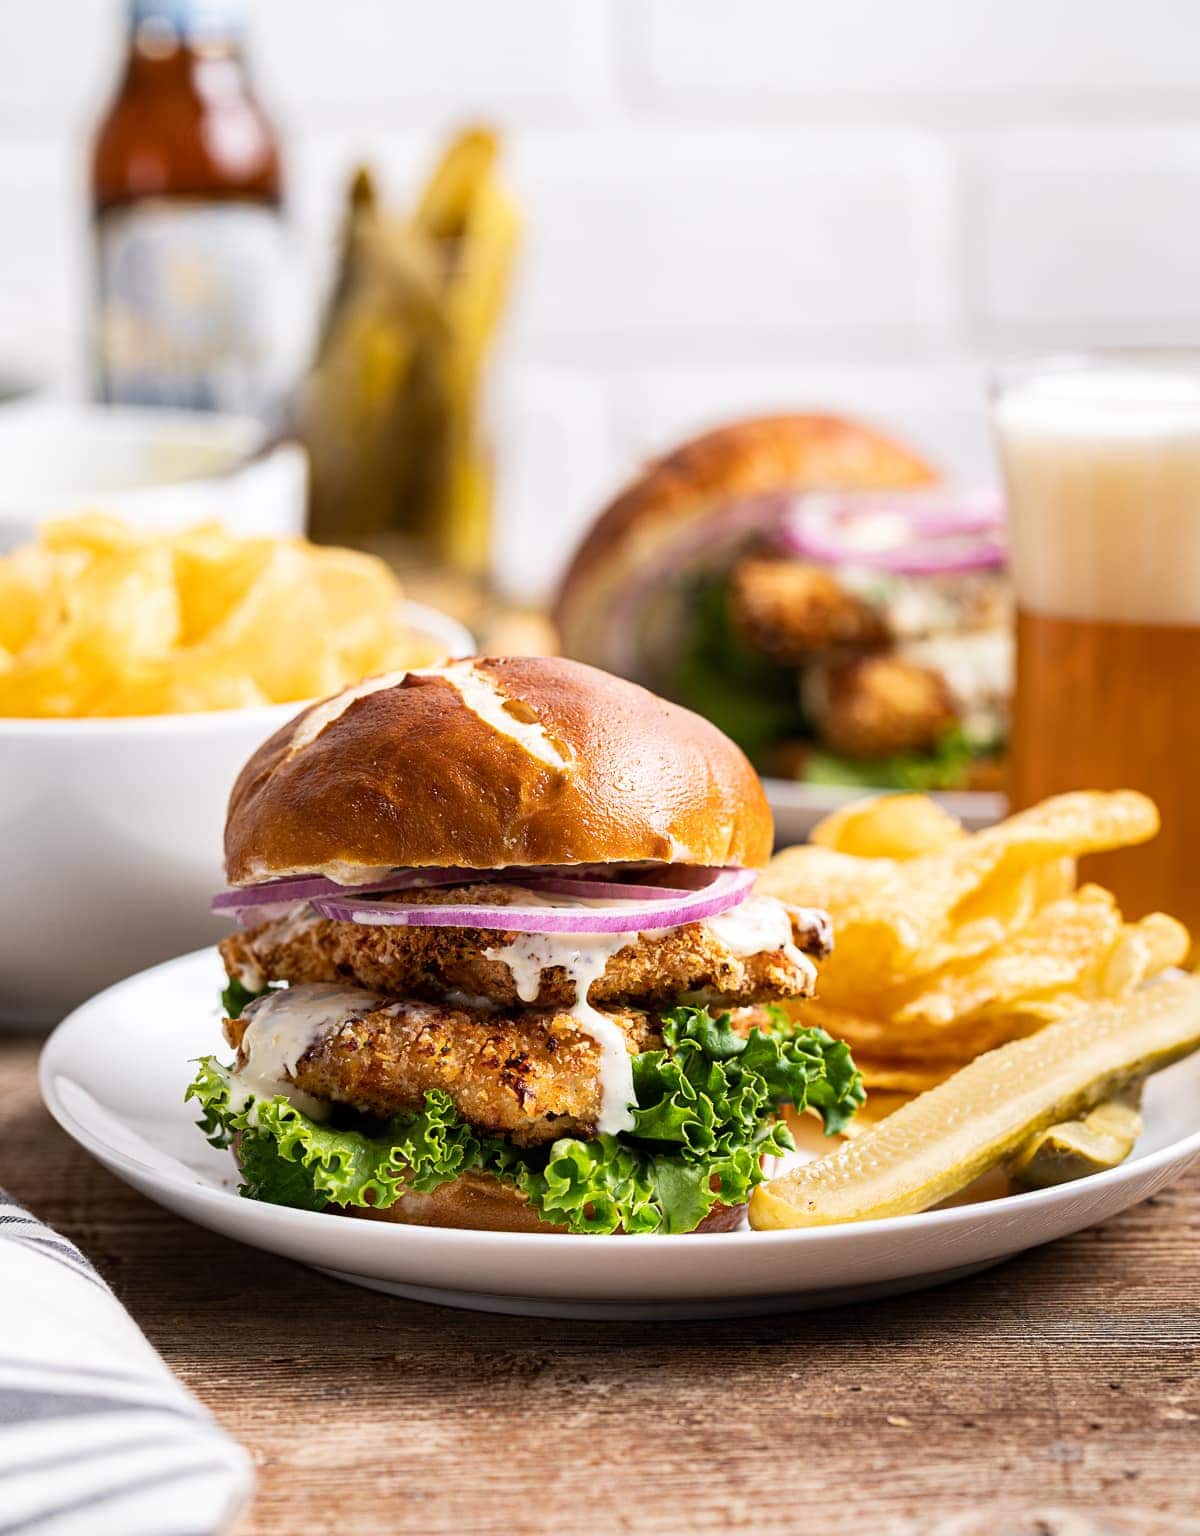  air fryer chicken sandwich with green lettuce, red onion slices, pickles and chips on plate, beer